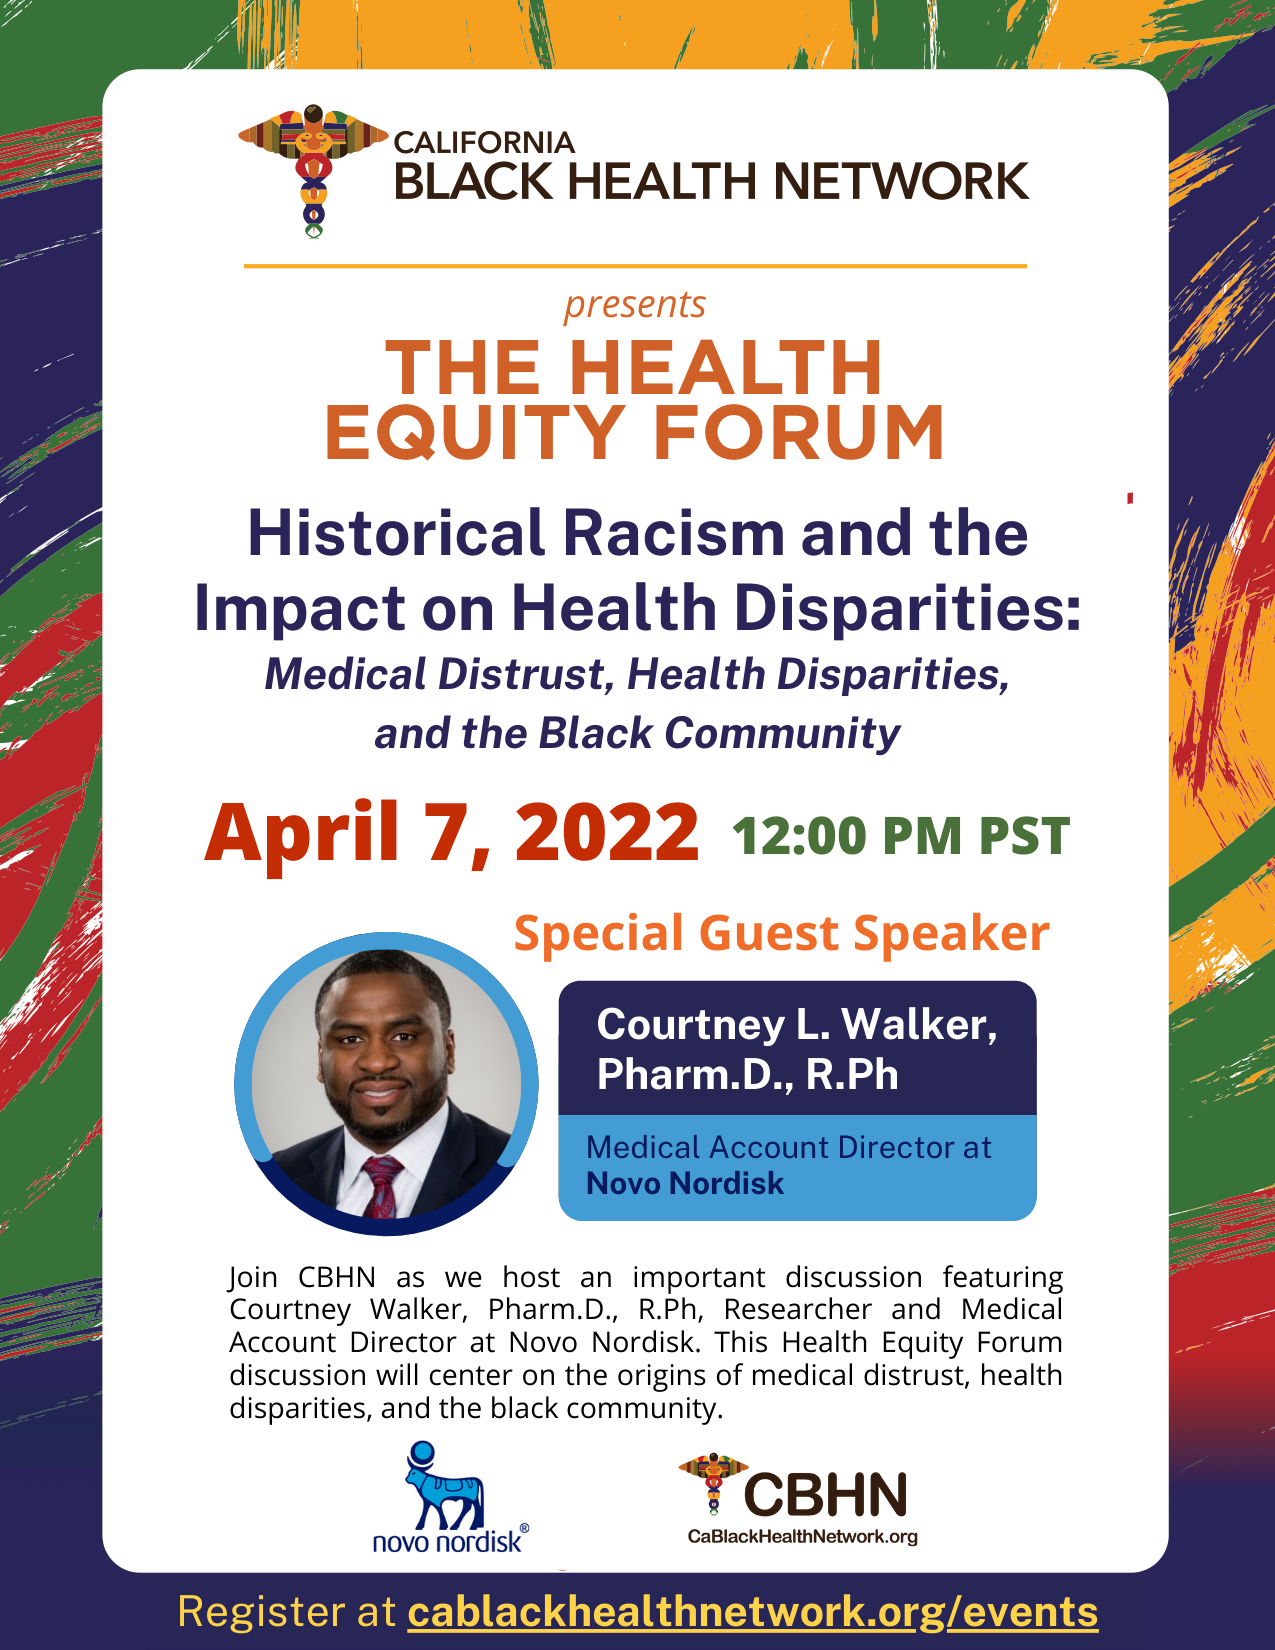 Historical Racism and the Impact on Health Disparities